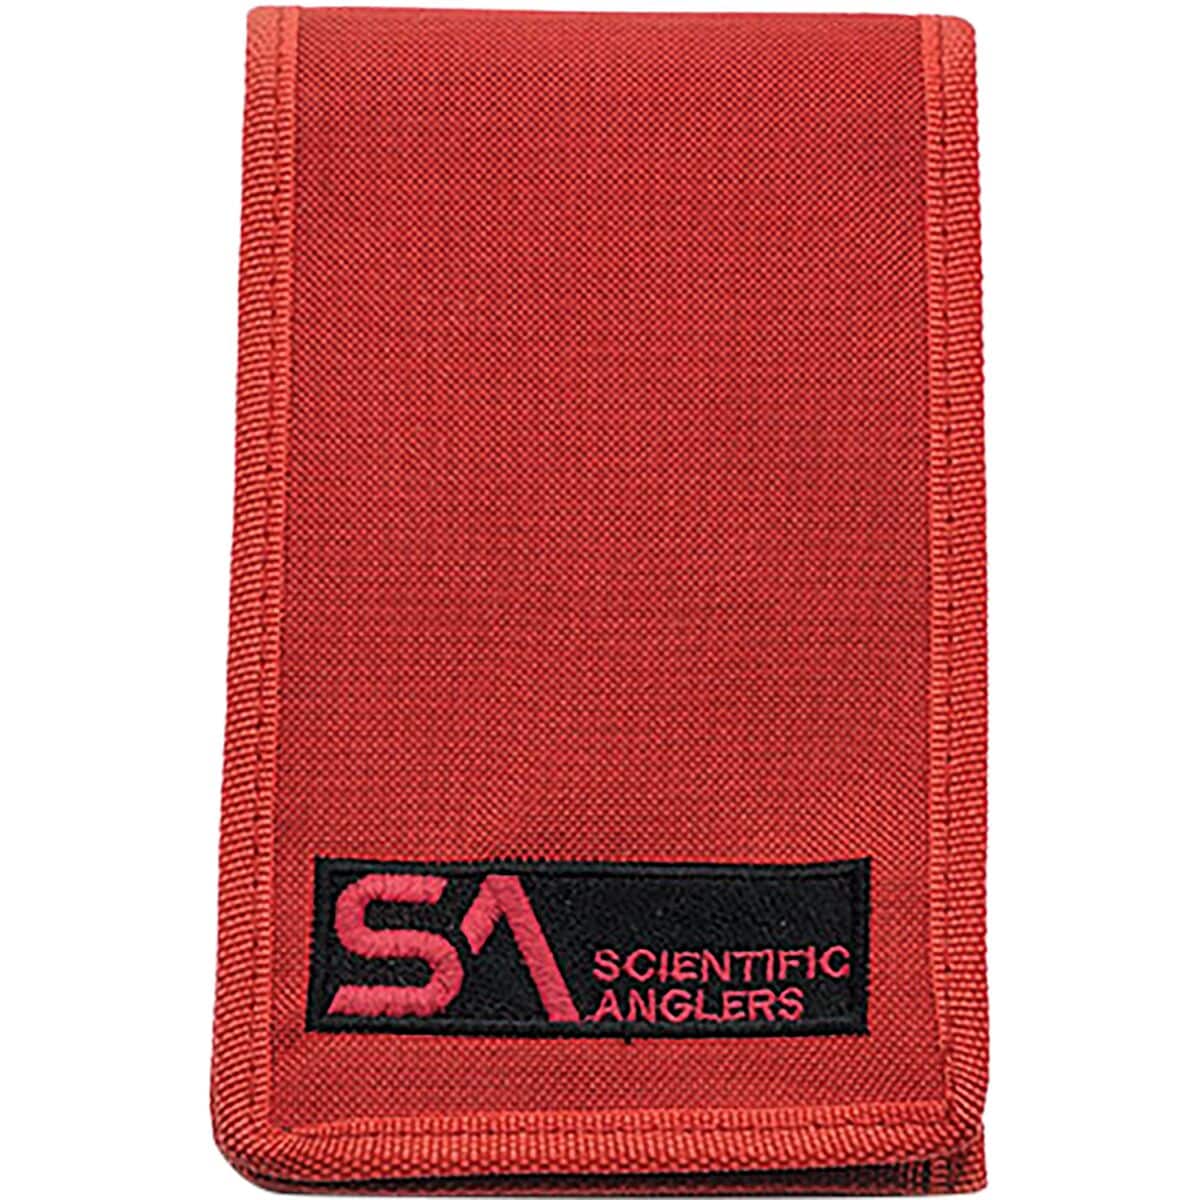 Scientific Anglers Absolute Leader Wallet - Fly Fishing